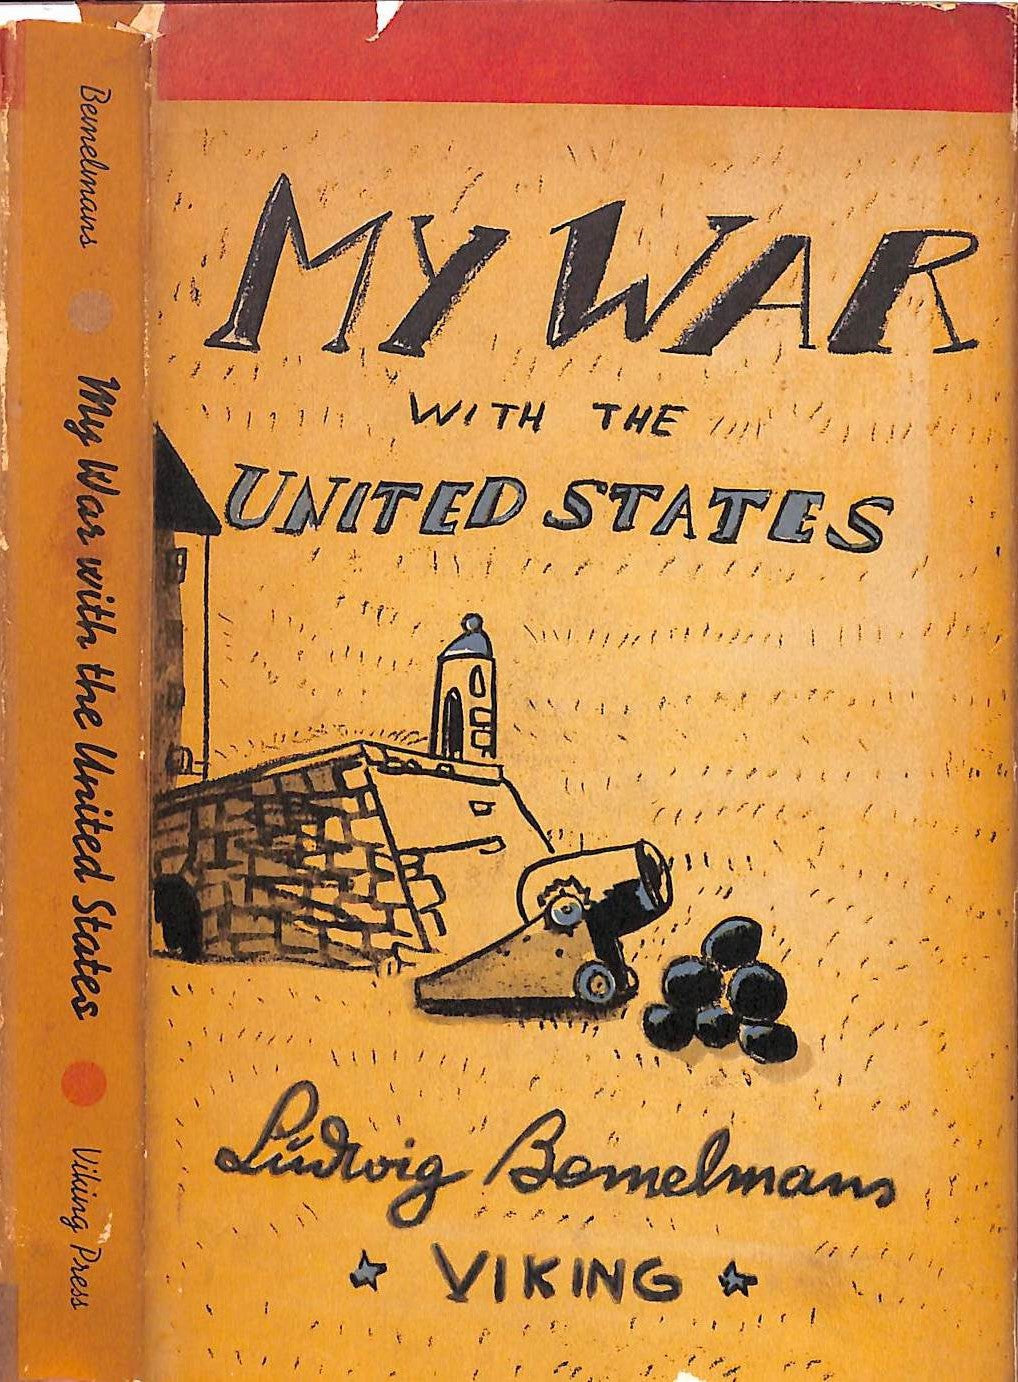 "My War With The United States" 1937 BEMELMANS, Ludwig